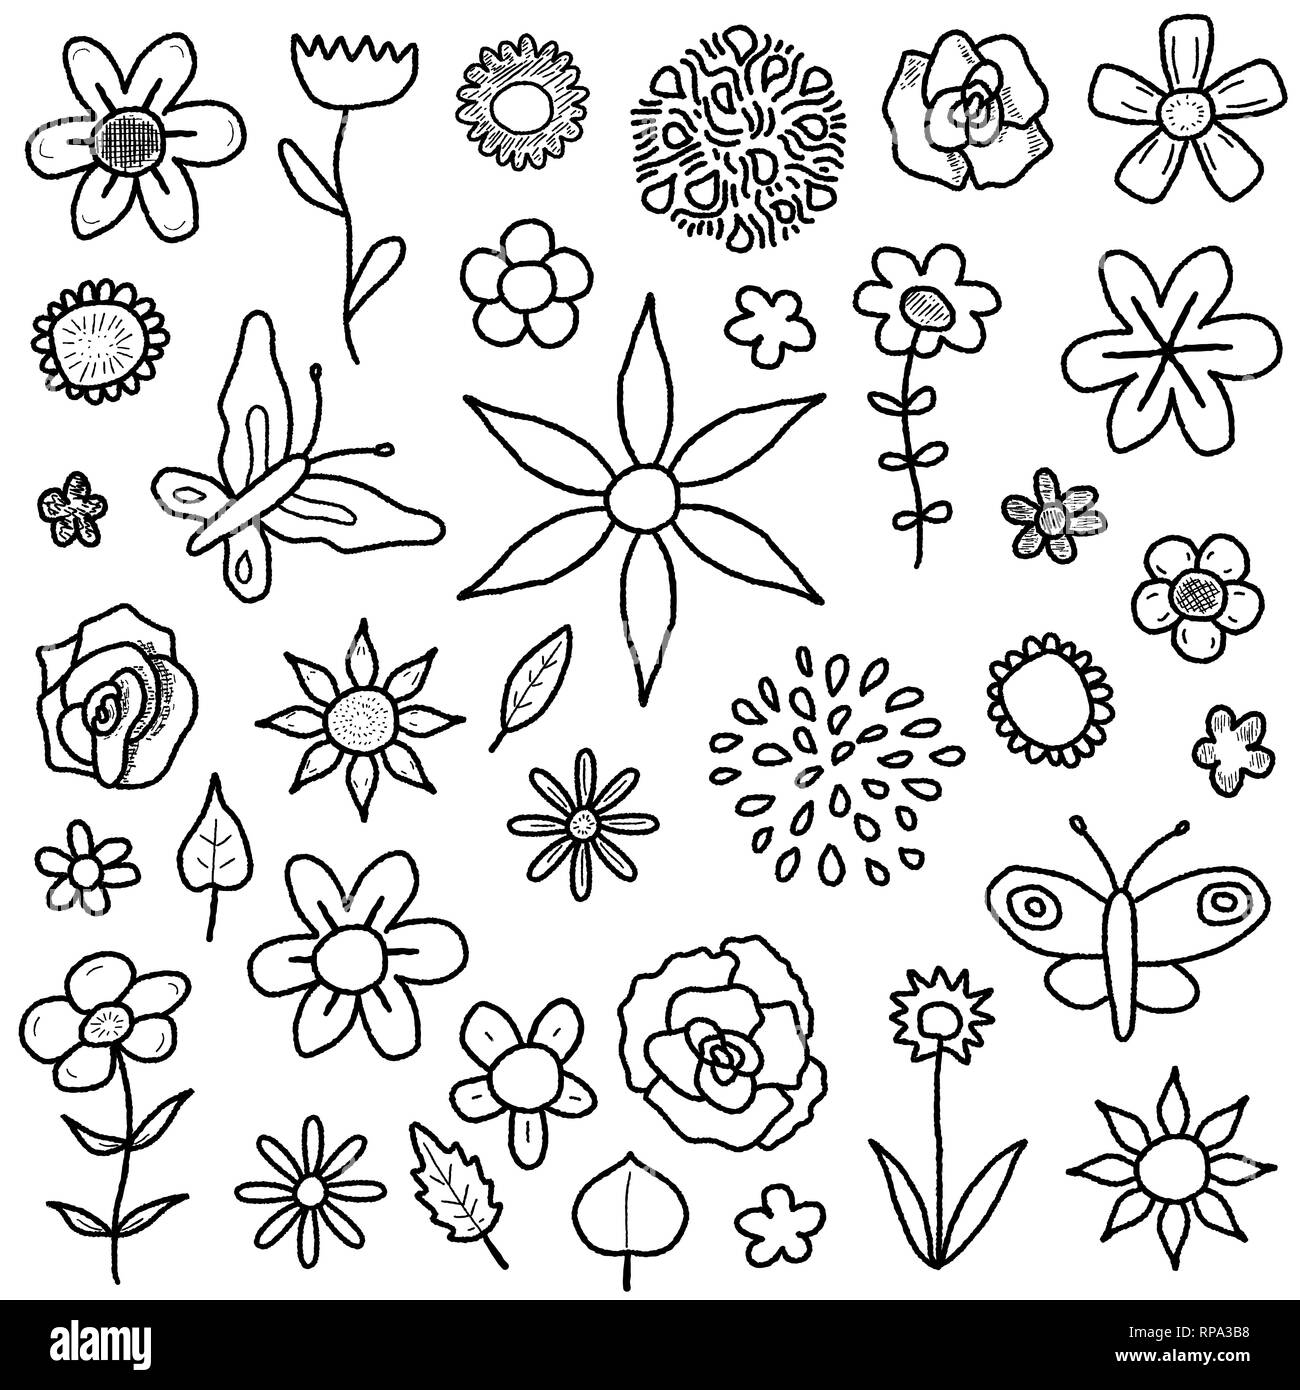 Doodle illustration collection with various flowers, leaves and butterflies. Floral scribble set. Stock Vector